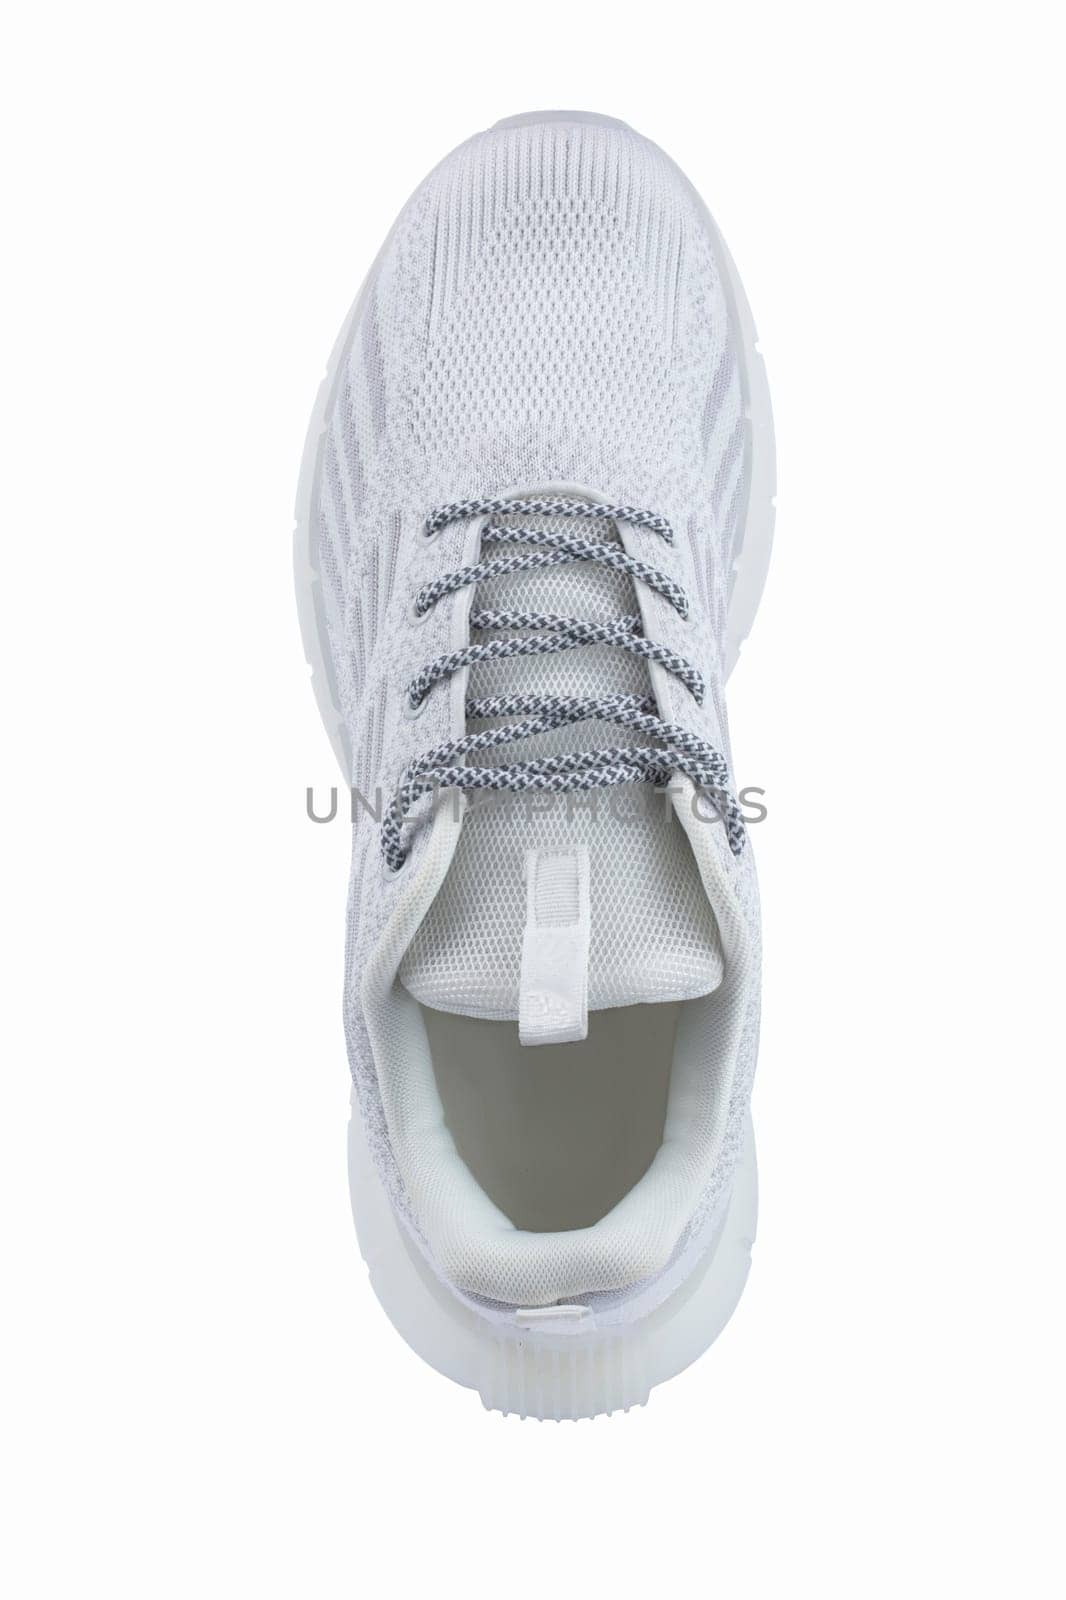 Sneaker one made of white fabric with lacing on a white background. by Sviatlana